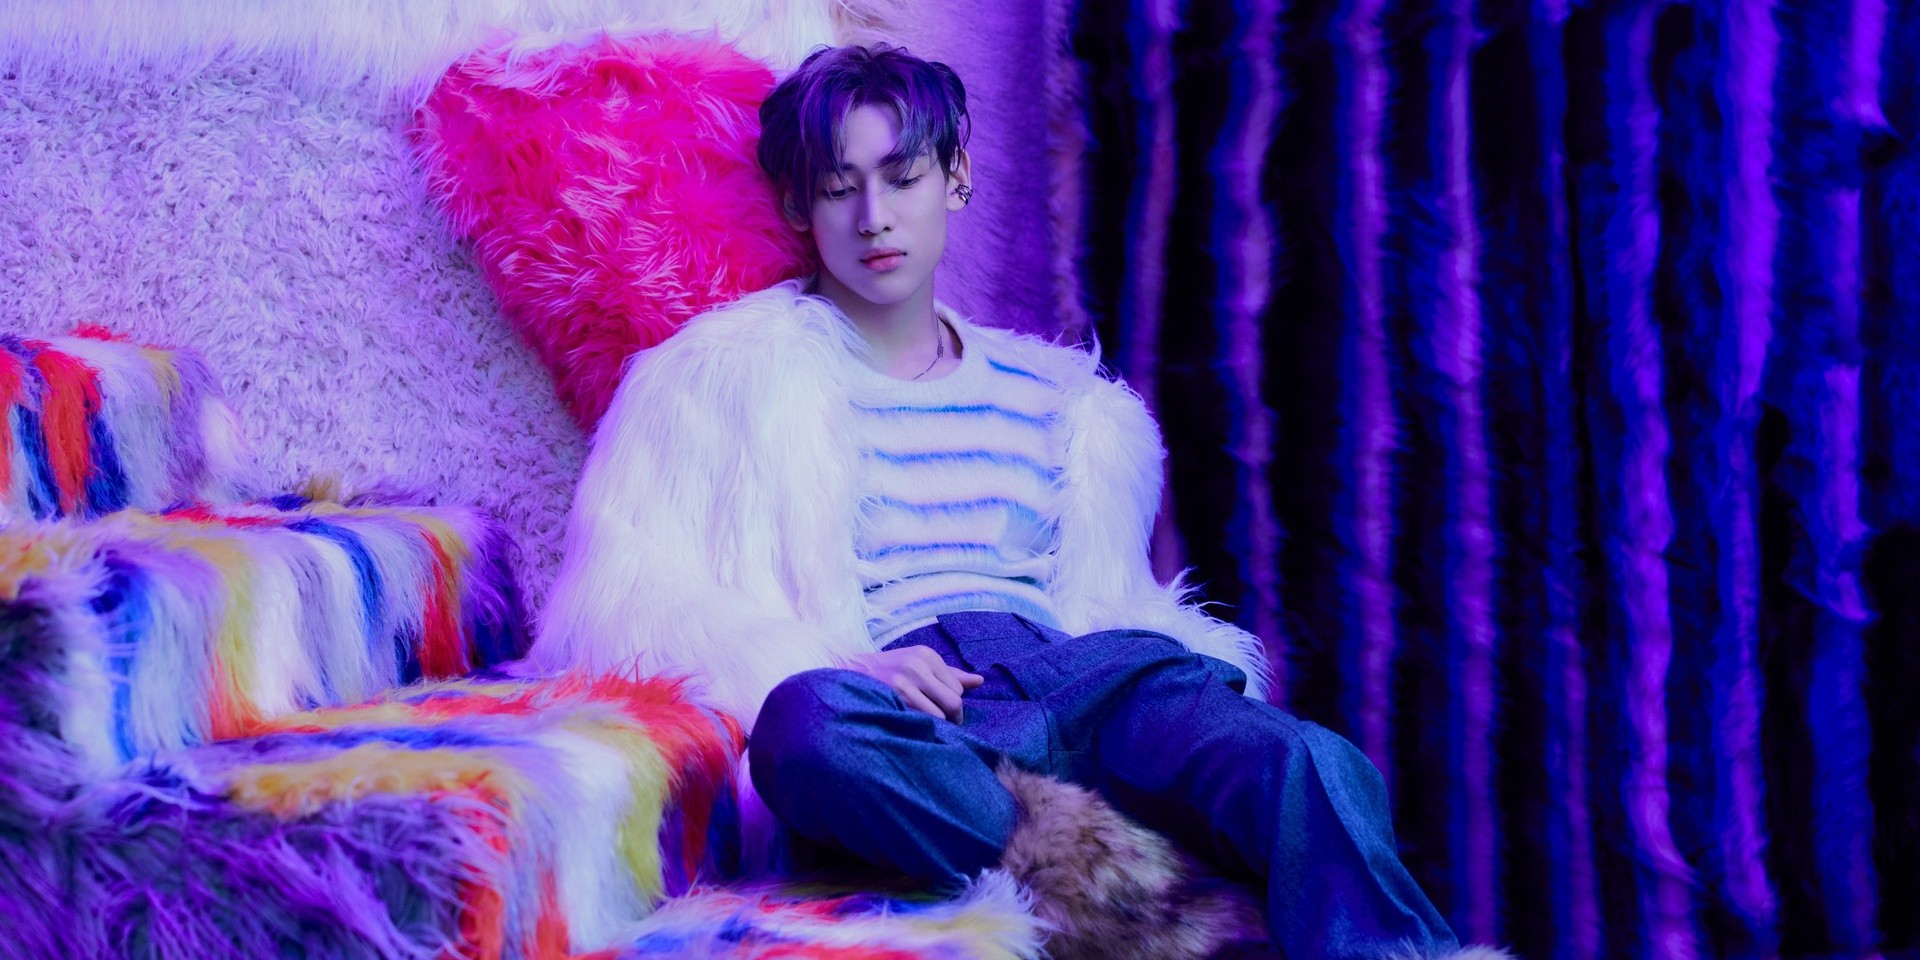 BamBam unveils second mini-album 'B' featuring collaborations with Pink Sweat$ and Red Velvet's Seulgi — listen